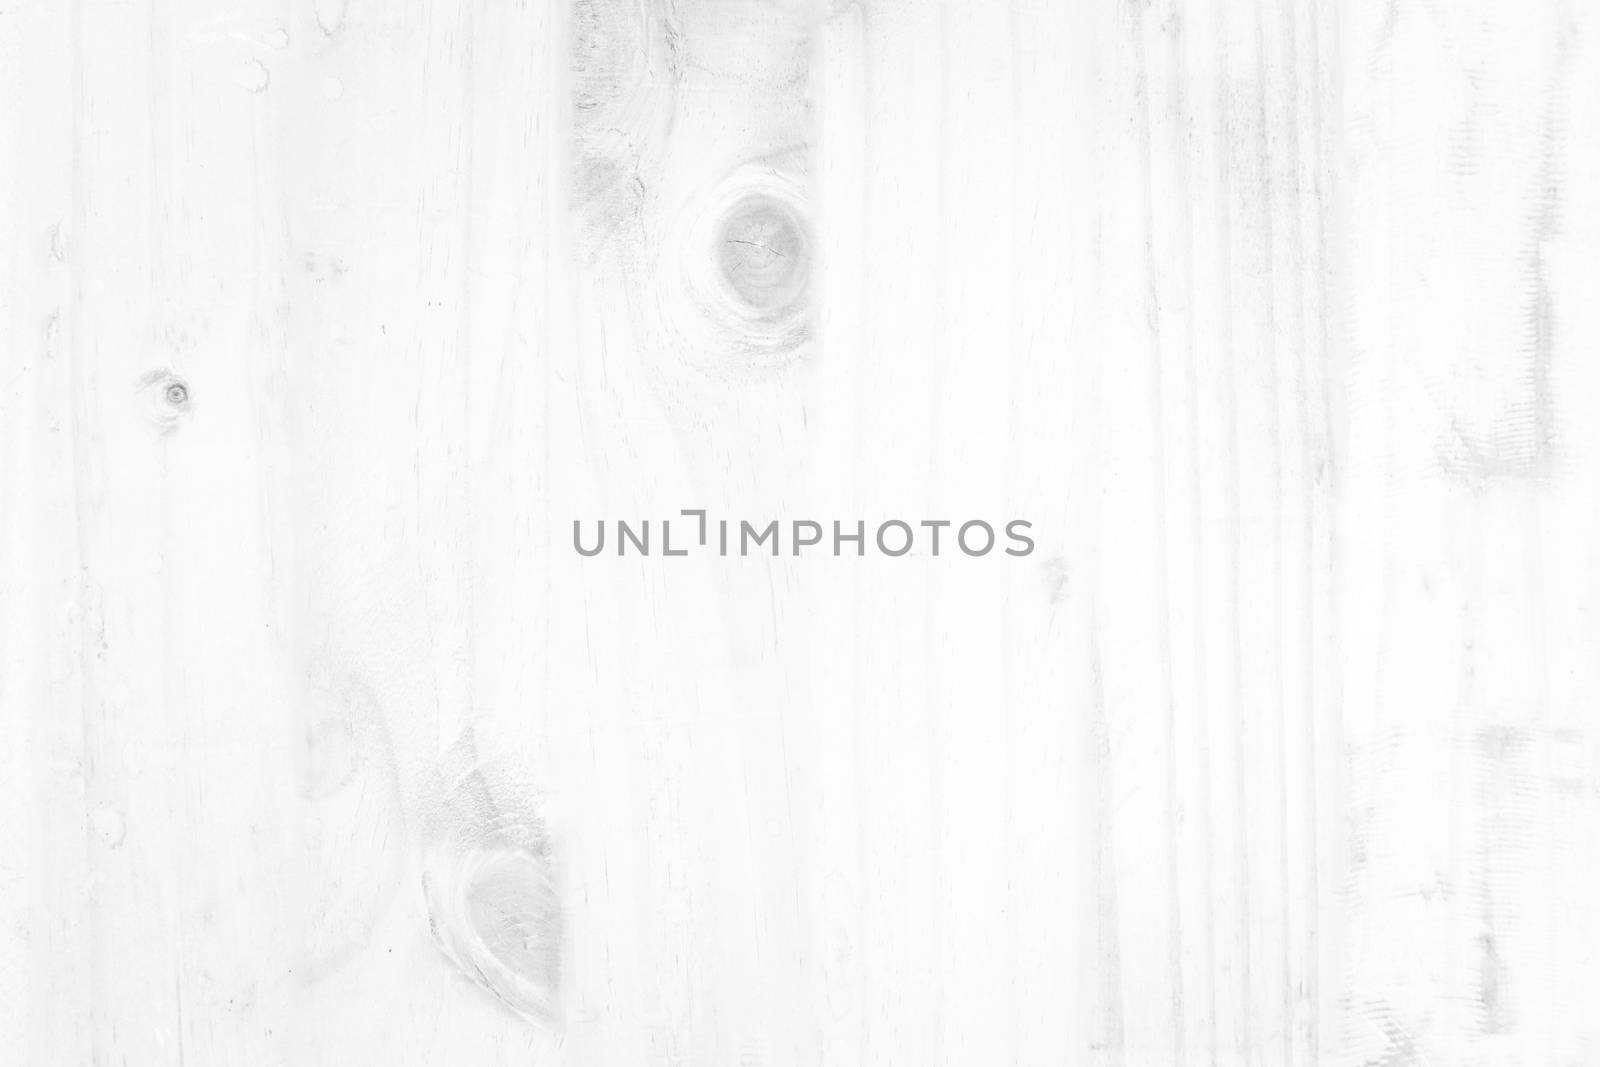 White grain luxury home table wood on top above view concept clean tabletop formica desk, counter background texture, rustic plain siding marble bacground in studio, grunge tile paper floor.